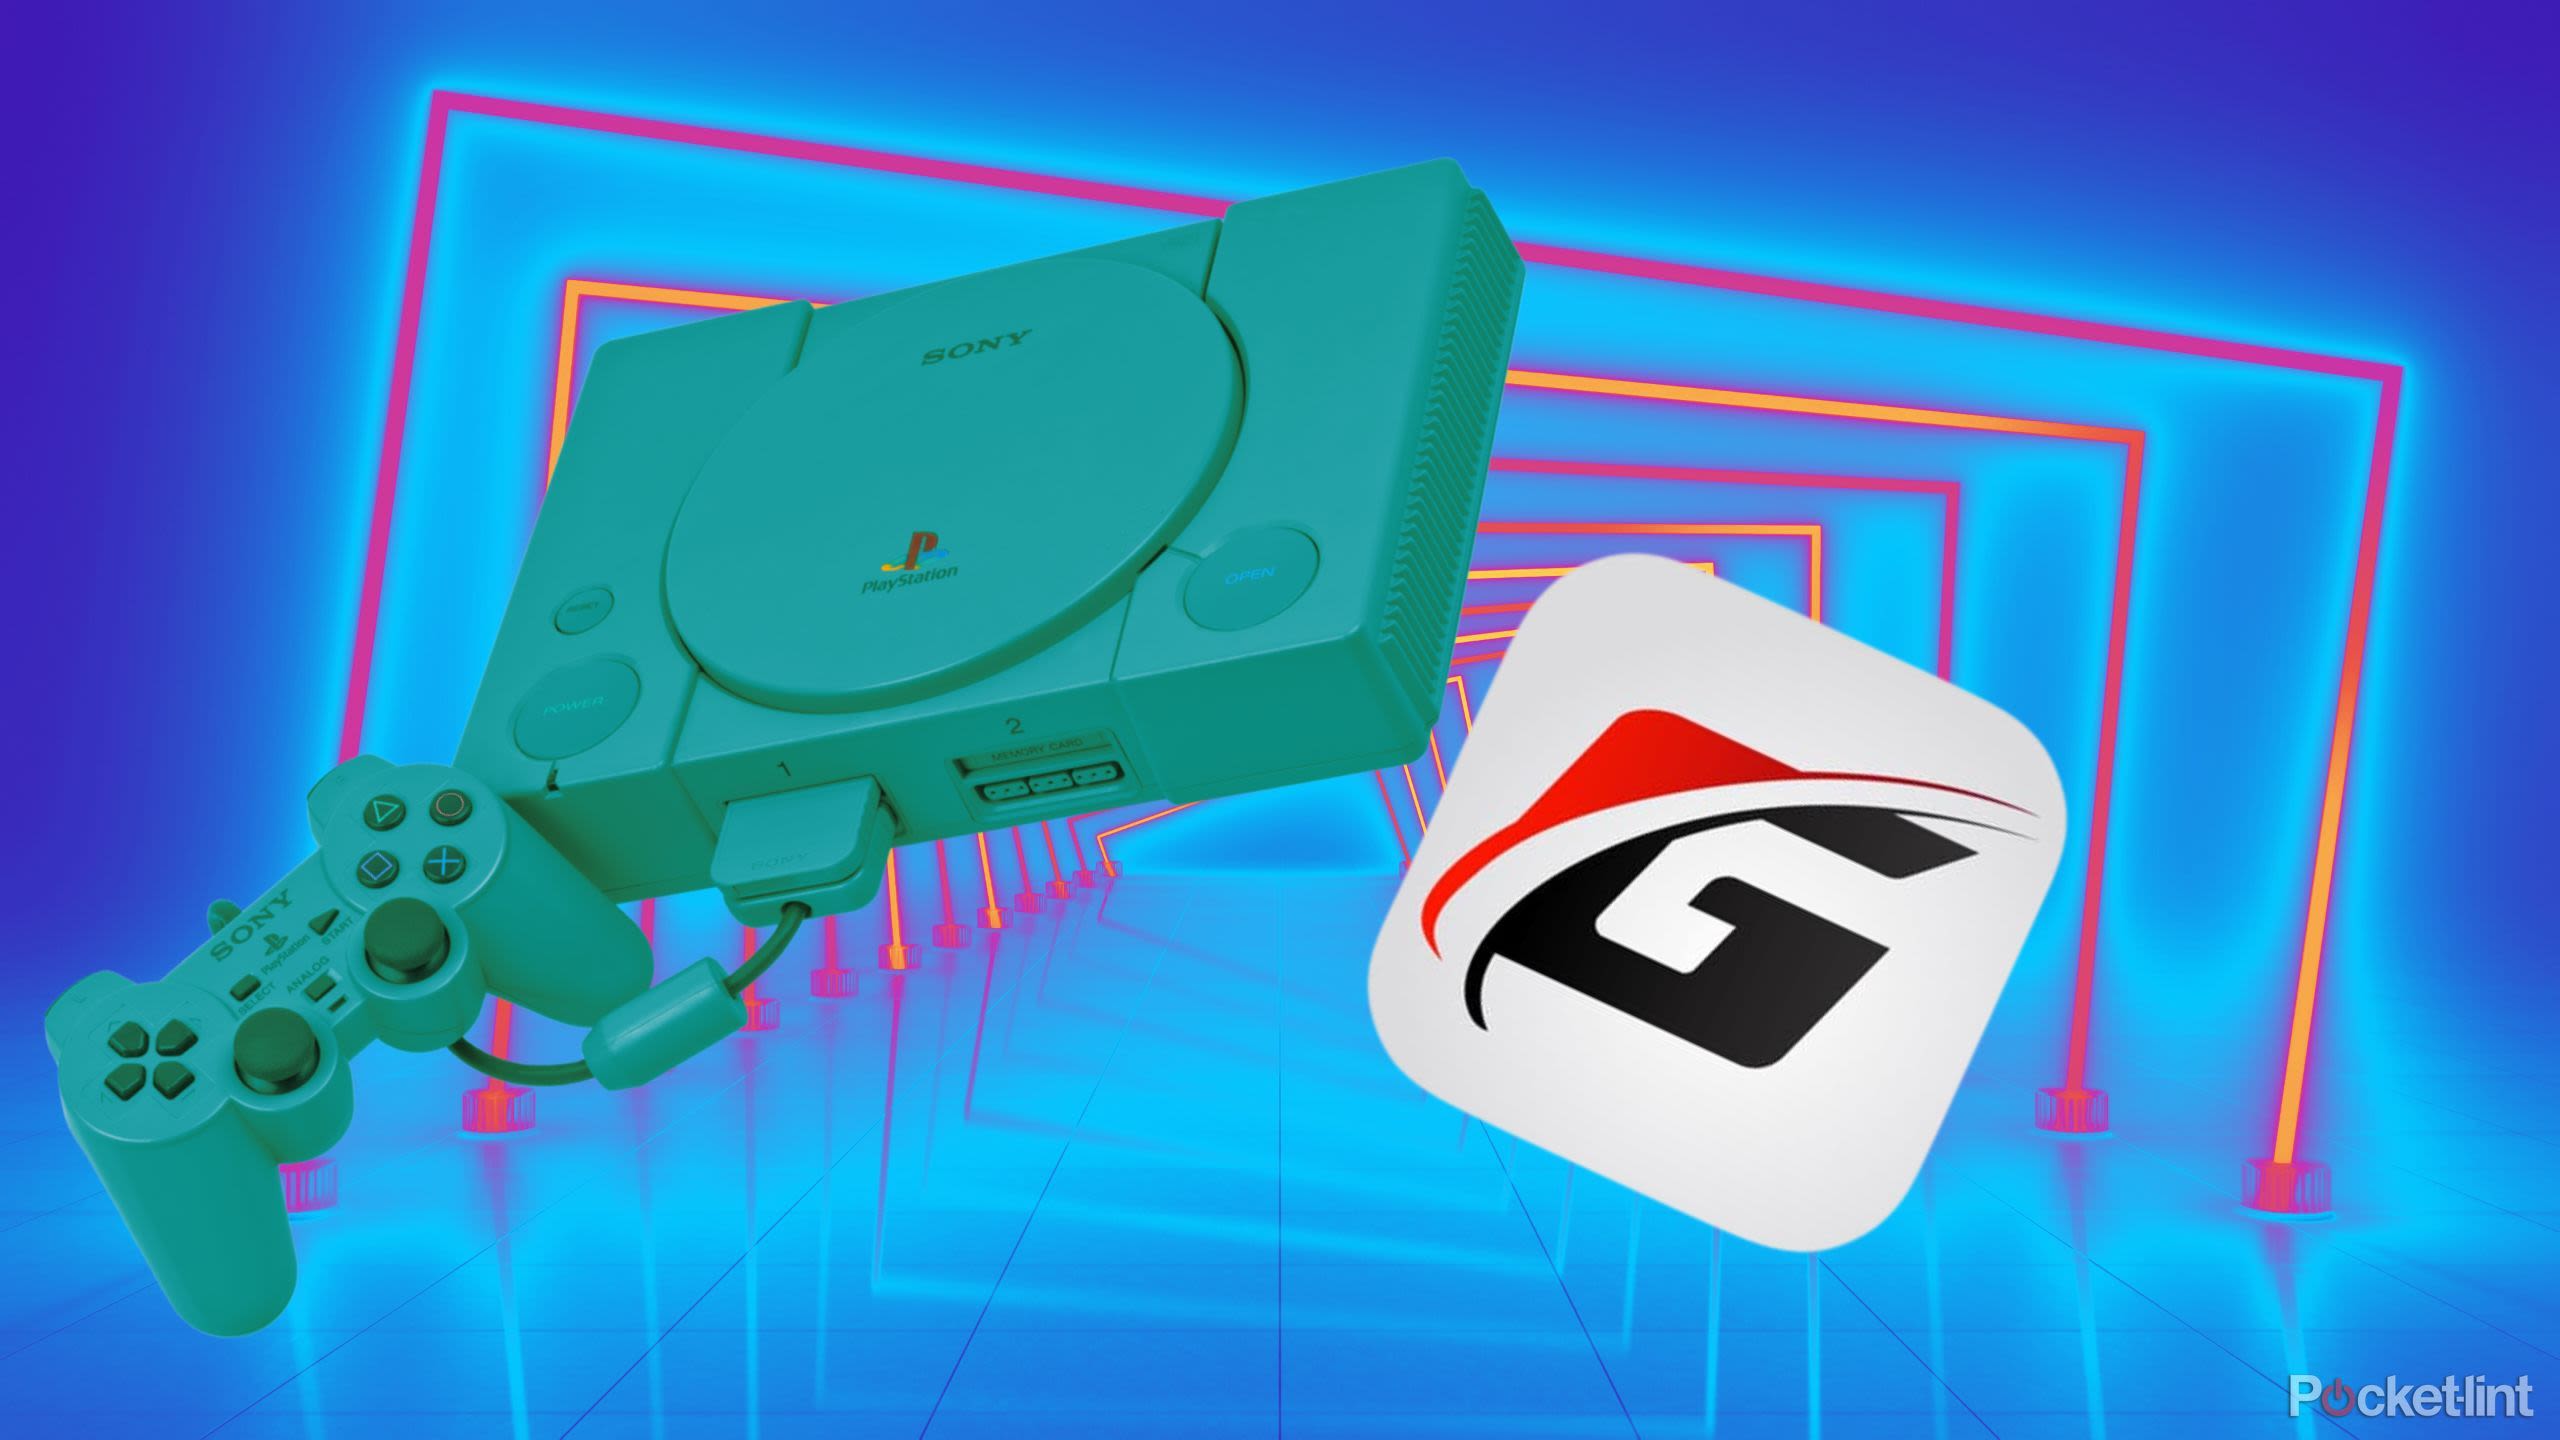 How to use the Gamma emulator to play classic PS1 games on your iPhone